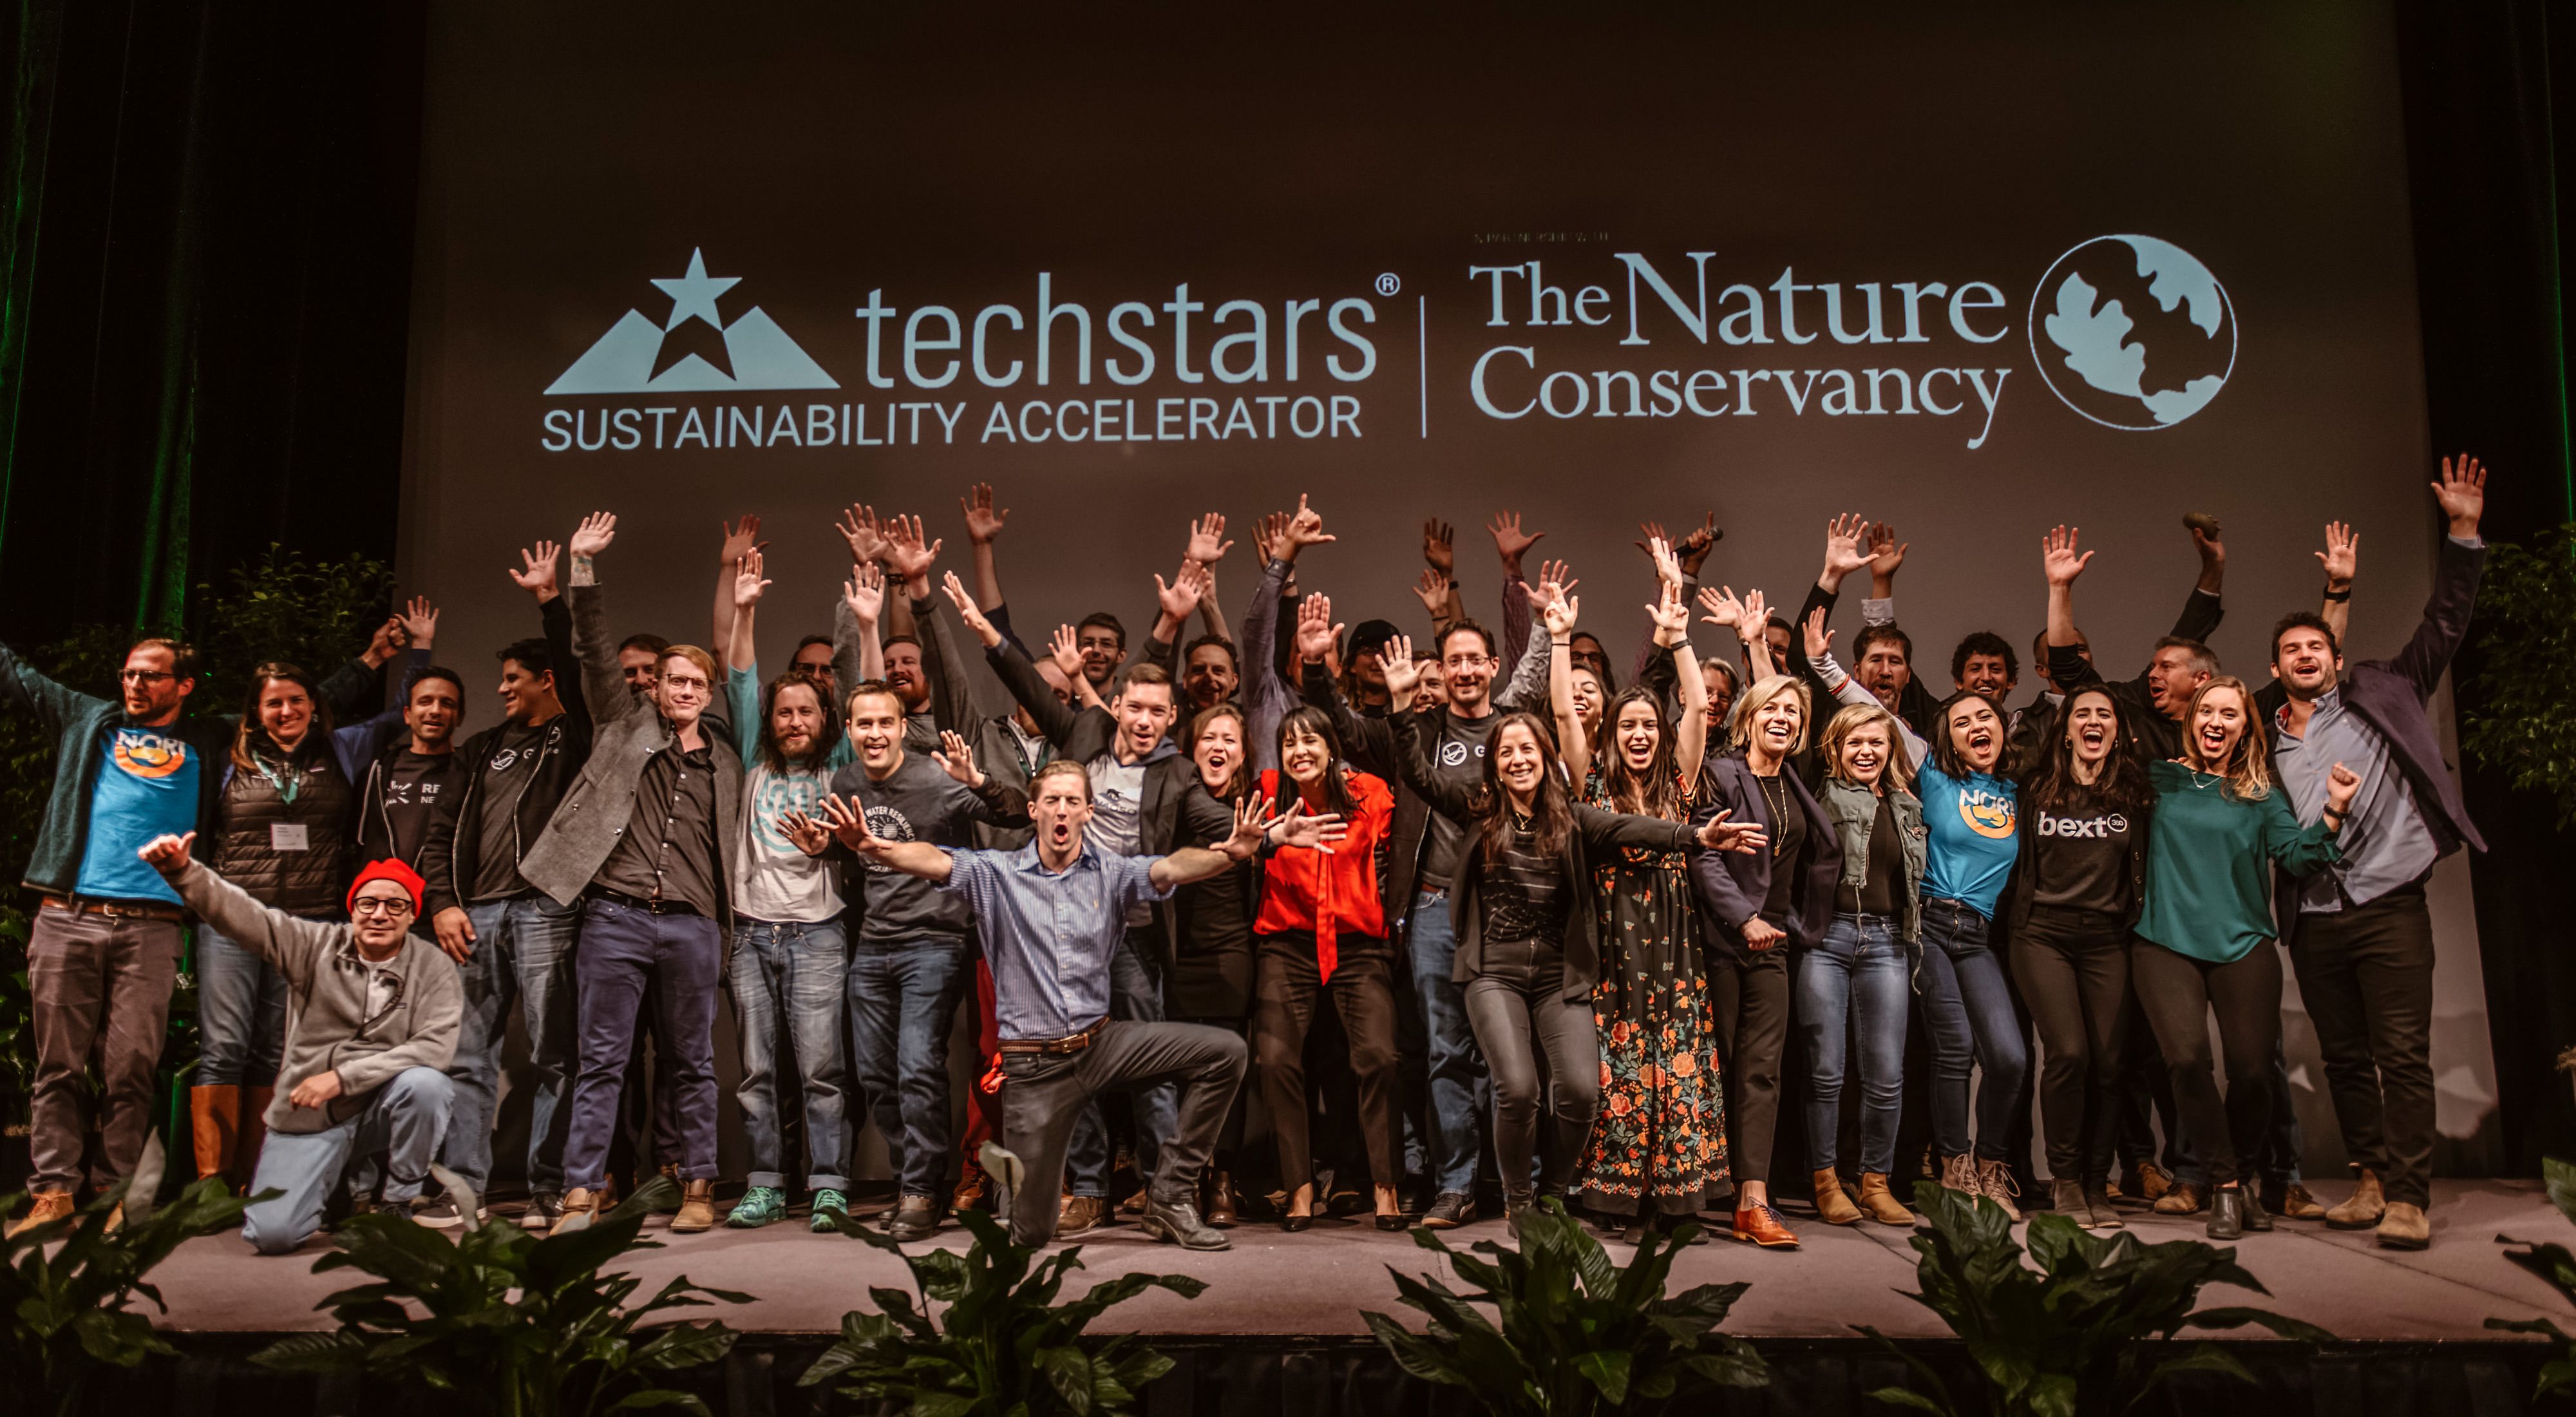 a large group of people on a stage holding their arms outstretched, with techstars and TNC logos behind them